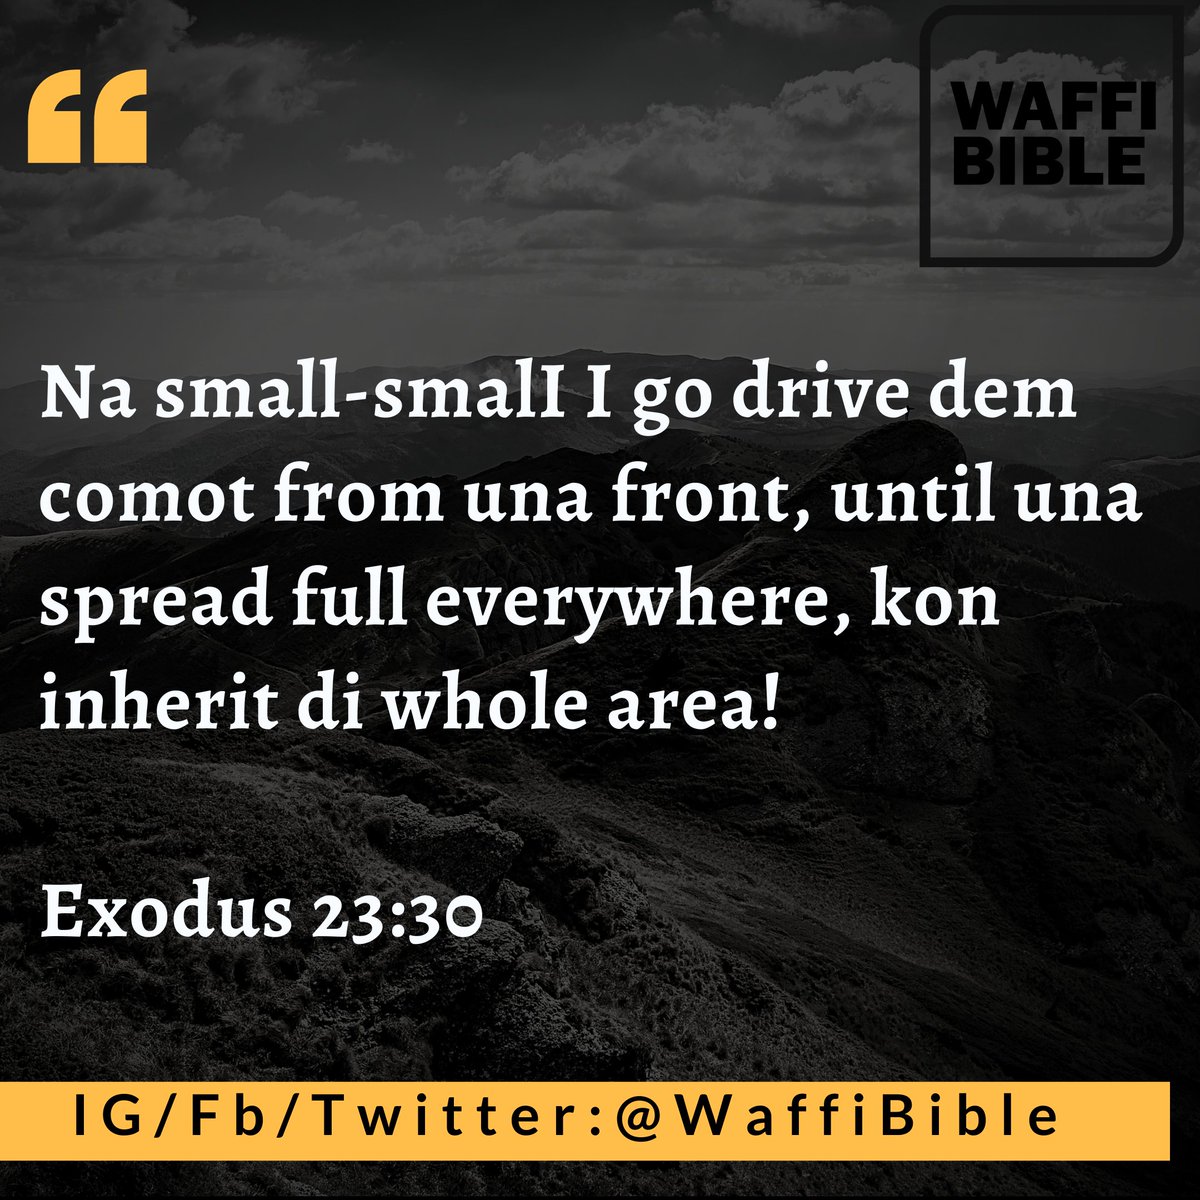 By little and little I will drive them out from before thee, until thou be increased, and inherit the land.

#RefHeb612
#FaithAndPatience
#WaffiBible